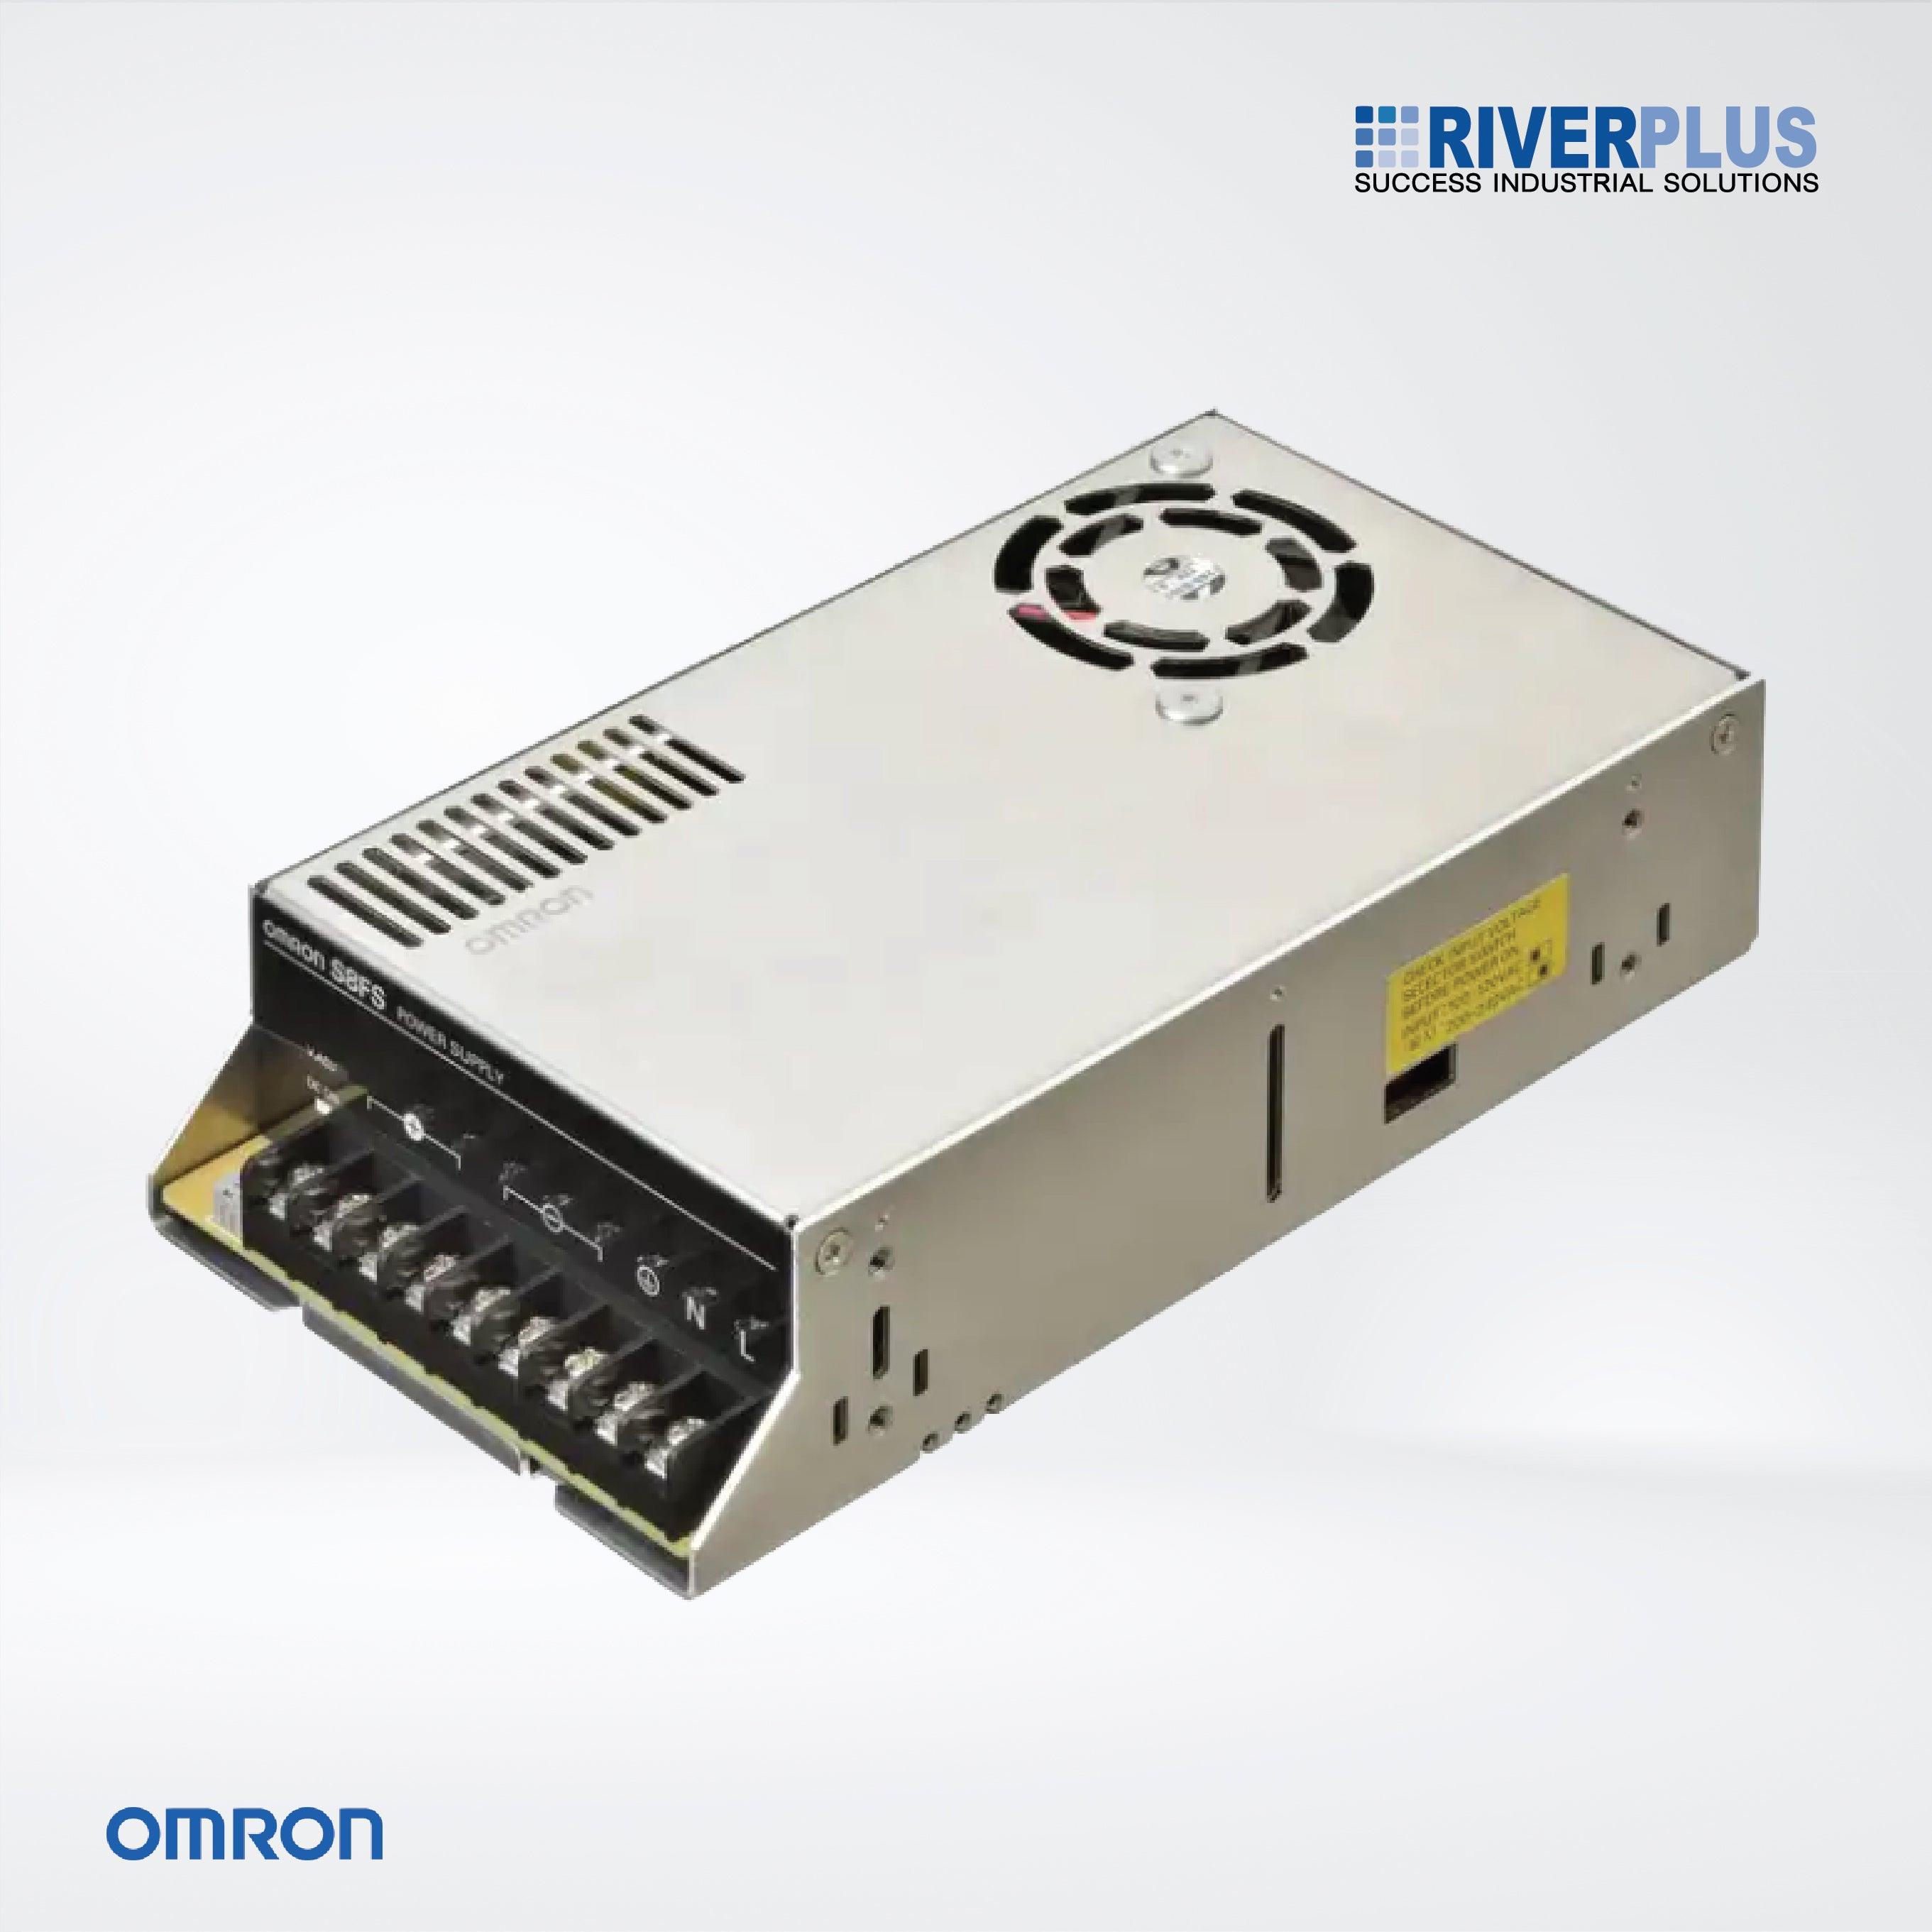 S8FS-C35005J Switch Mode Power Supply ,350 W , 5VDC ,Model with terminal block facing forward - Riverplus